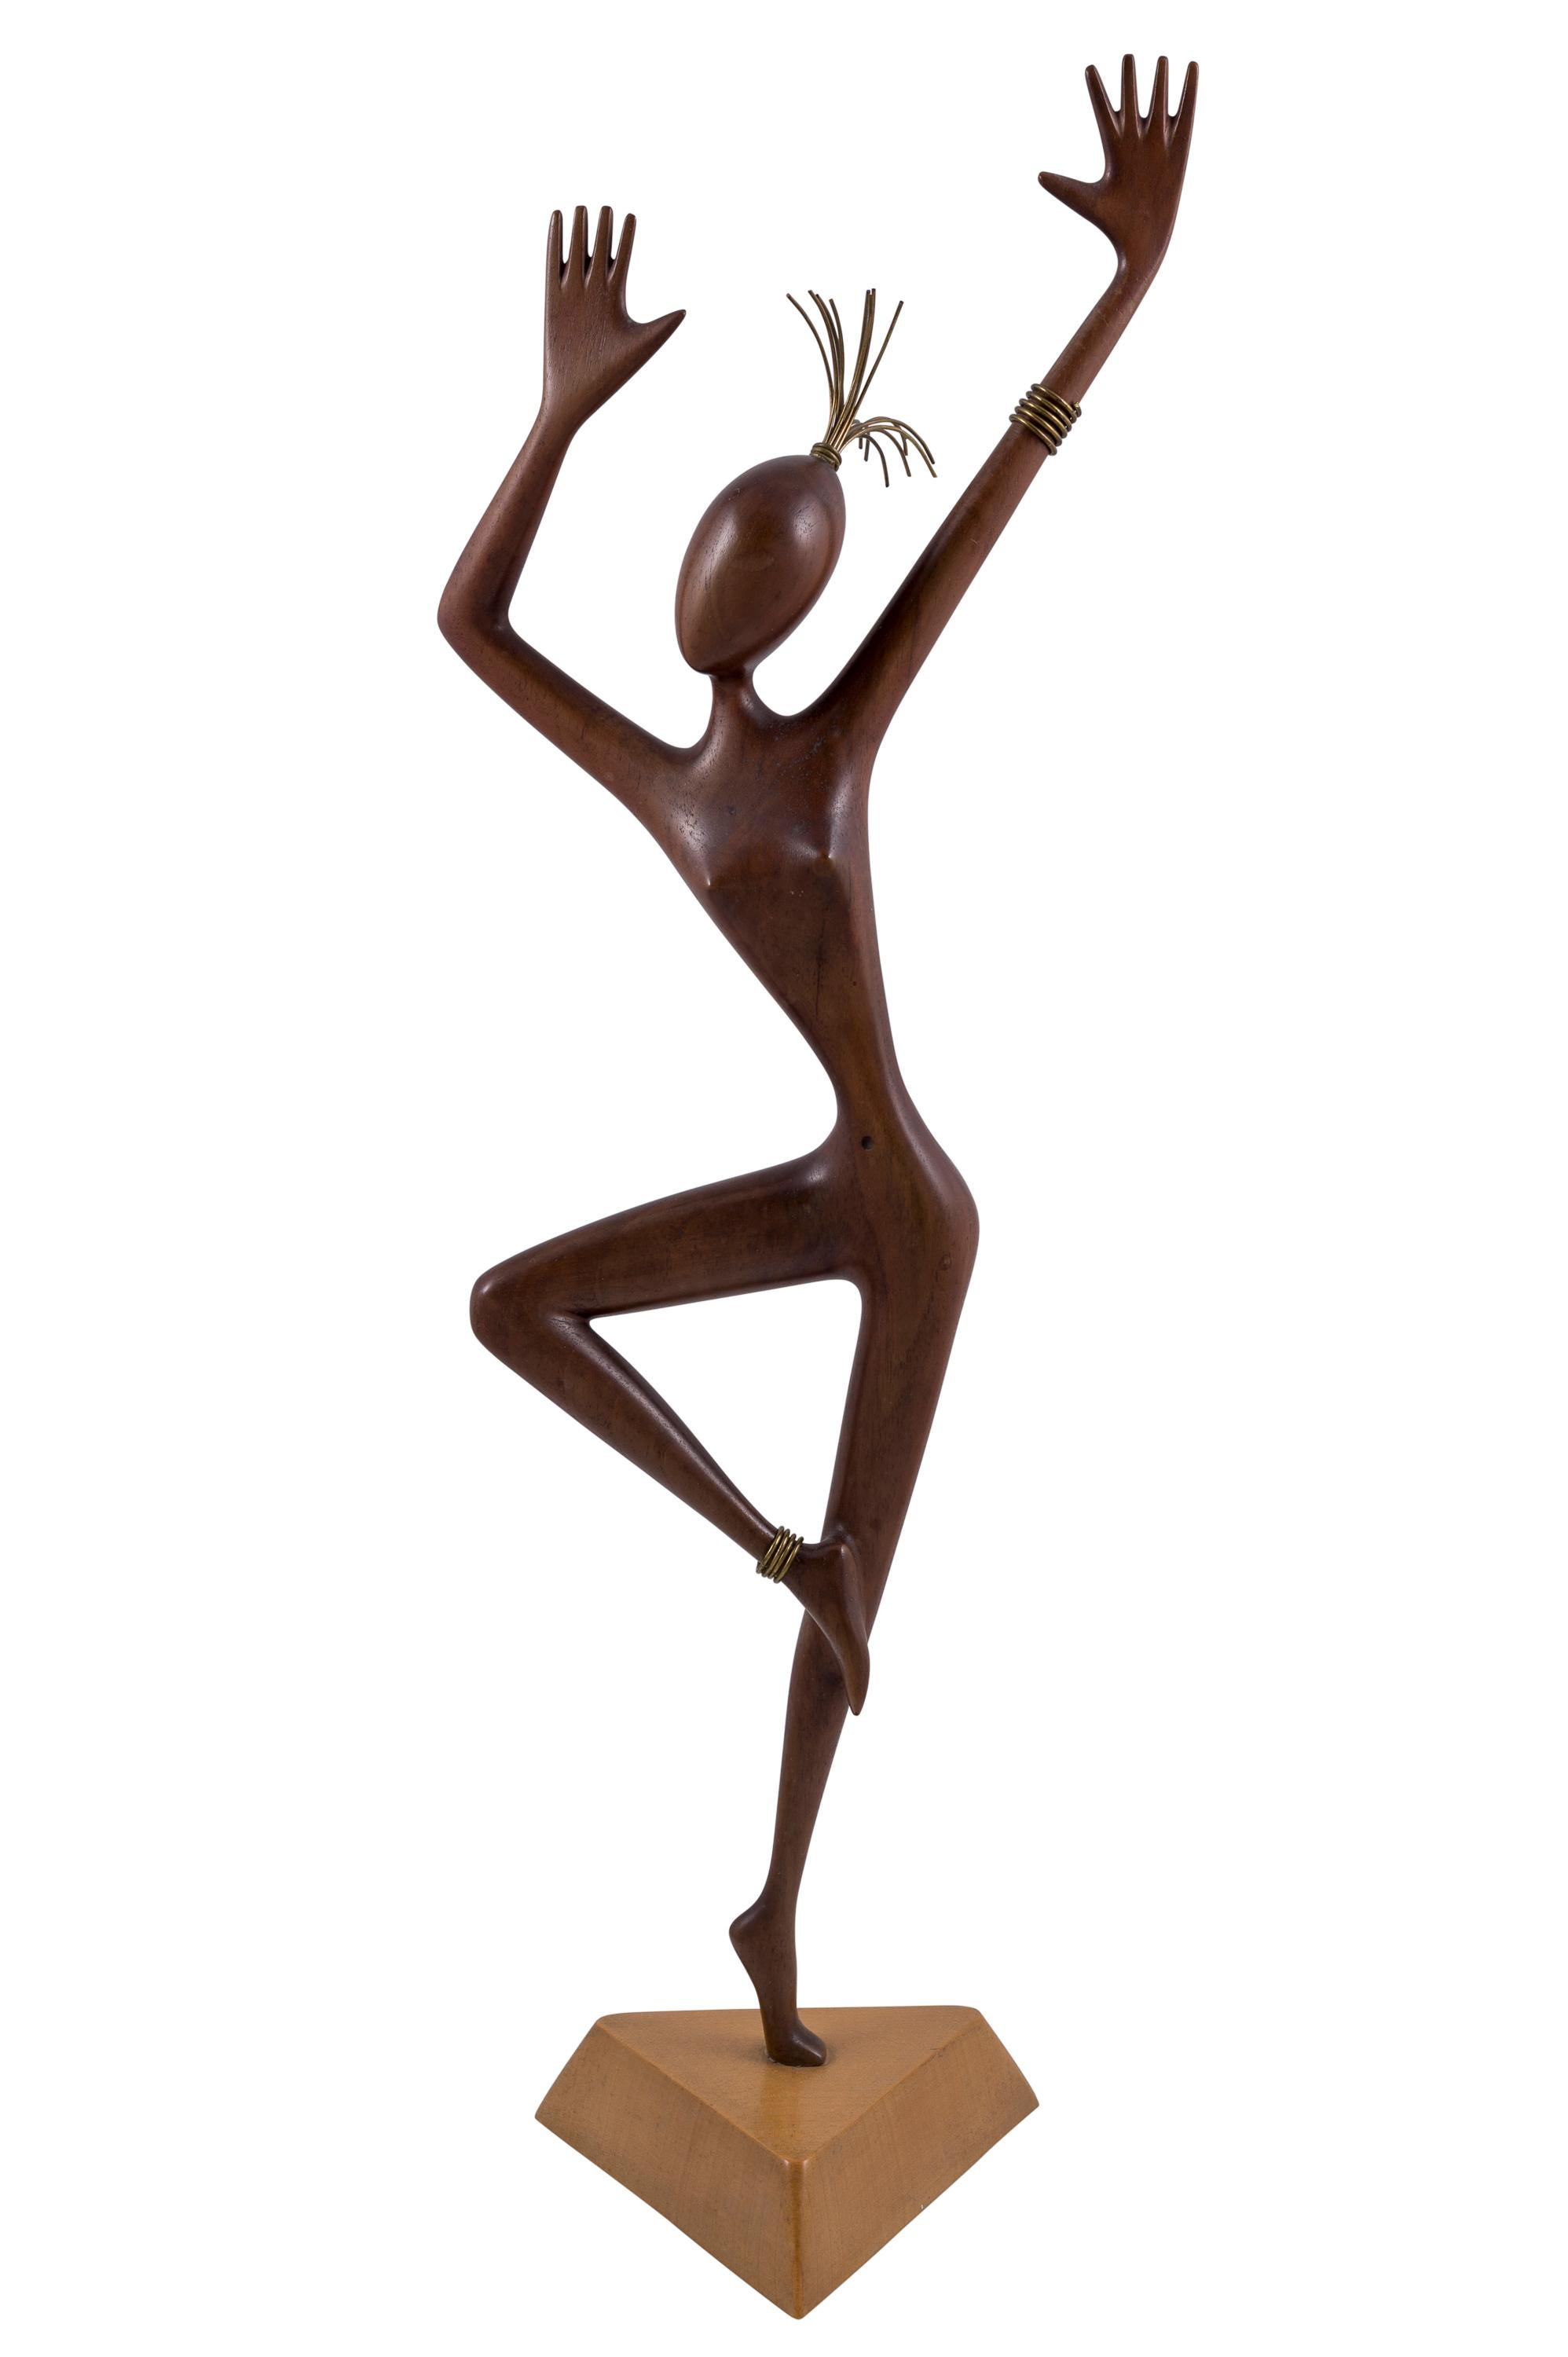 Wooden sculpture of a dancer with brass details, Werkstaette Hagenauer Wien, circa 1950

Today, the Werkstaette Hagenauer is rightfully among the most important Austrian Arts & Crafts manufacturers of the 20th century. The clear, strict formal